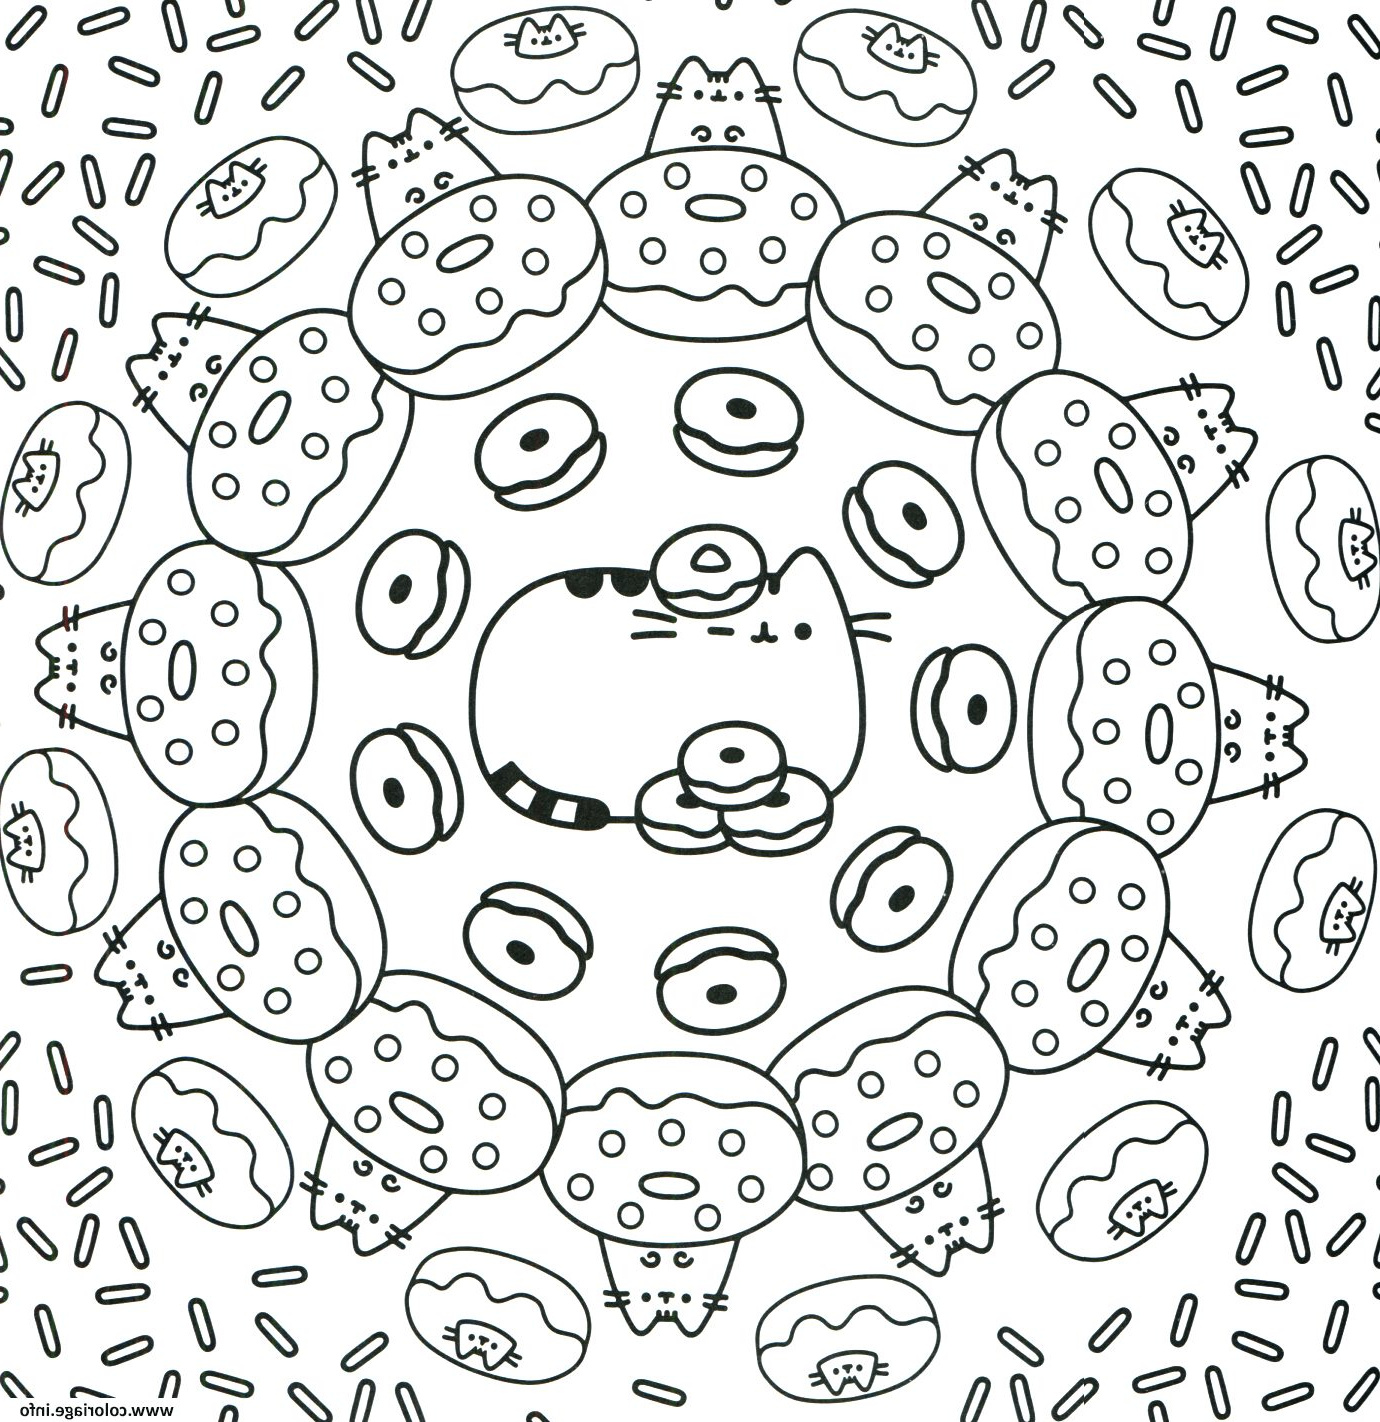 pusheen the cat donuts pattern coloriage dessin